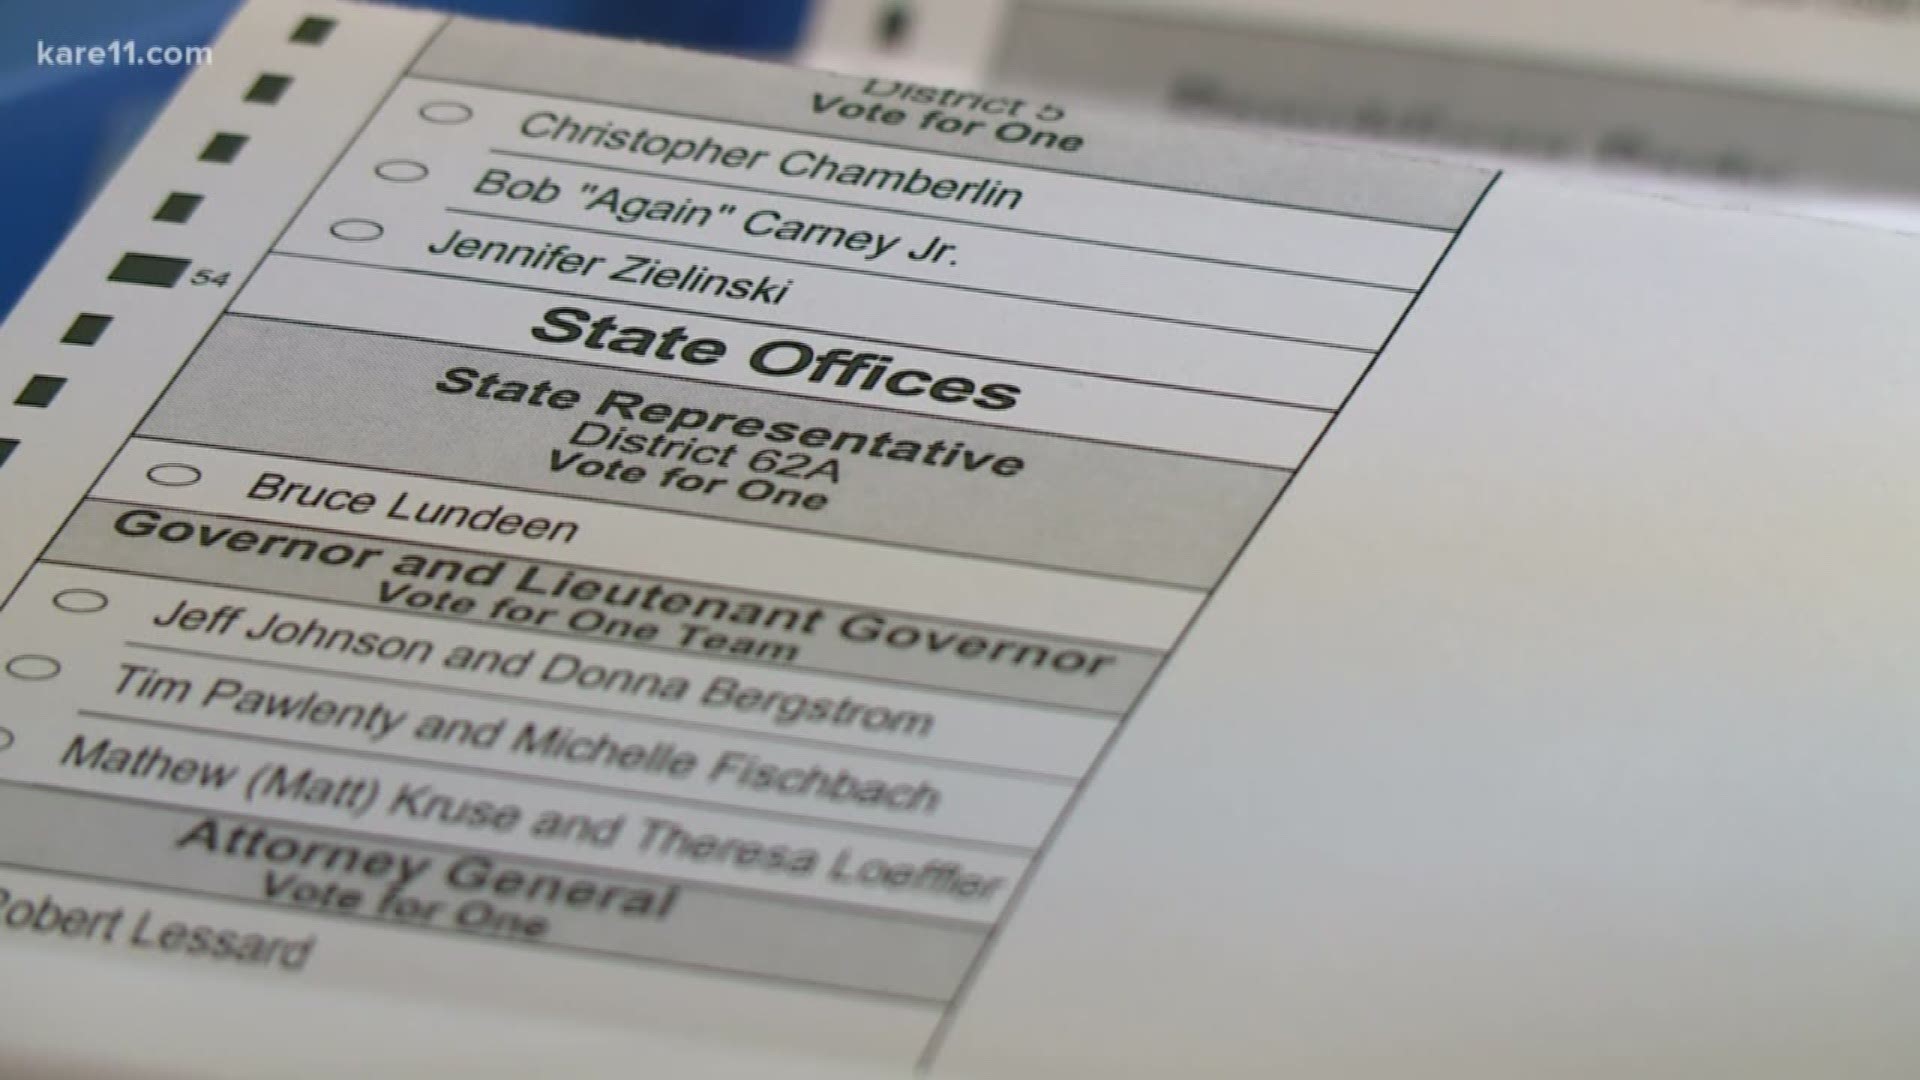 Hennepin County election officials say they found 12 absentee ballots that have been witnessed and signed by someone who was forging another person's signature. That person was not eligible to serve as an absentee witness. https://kare11.tv/2OqRfMY